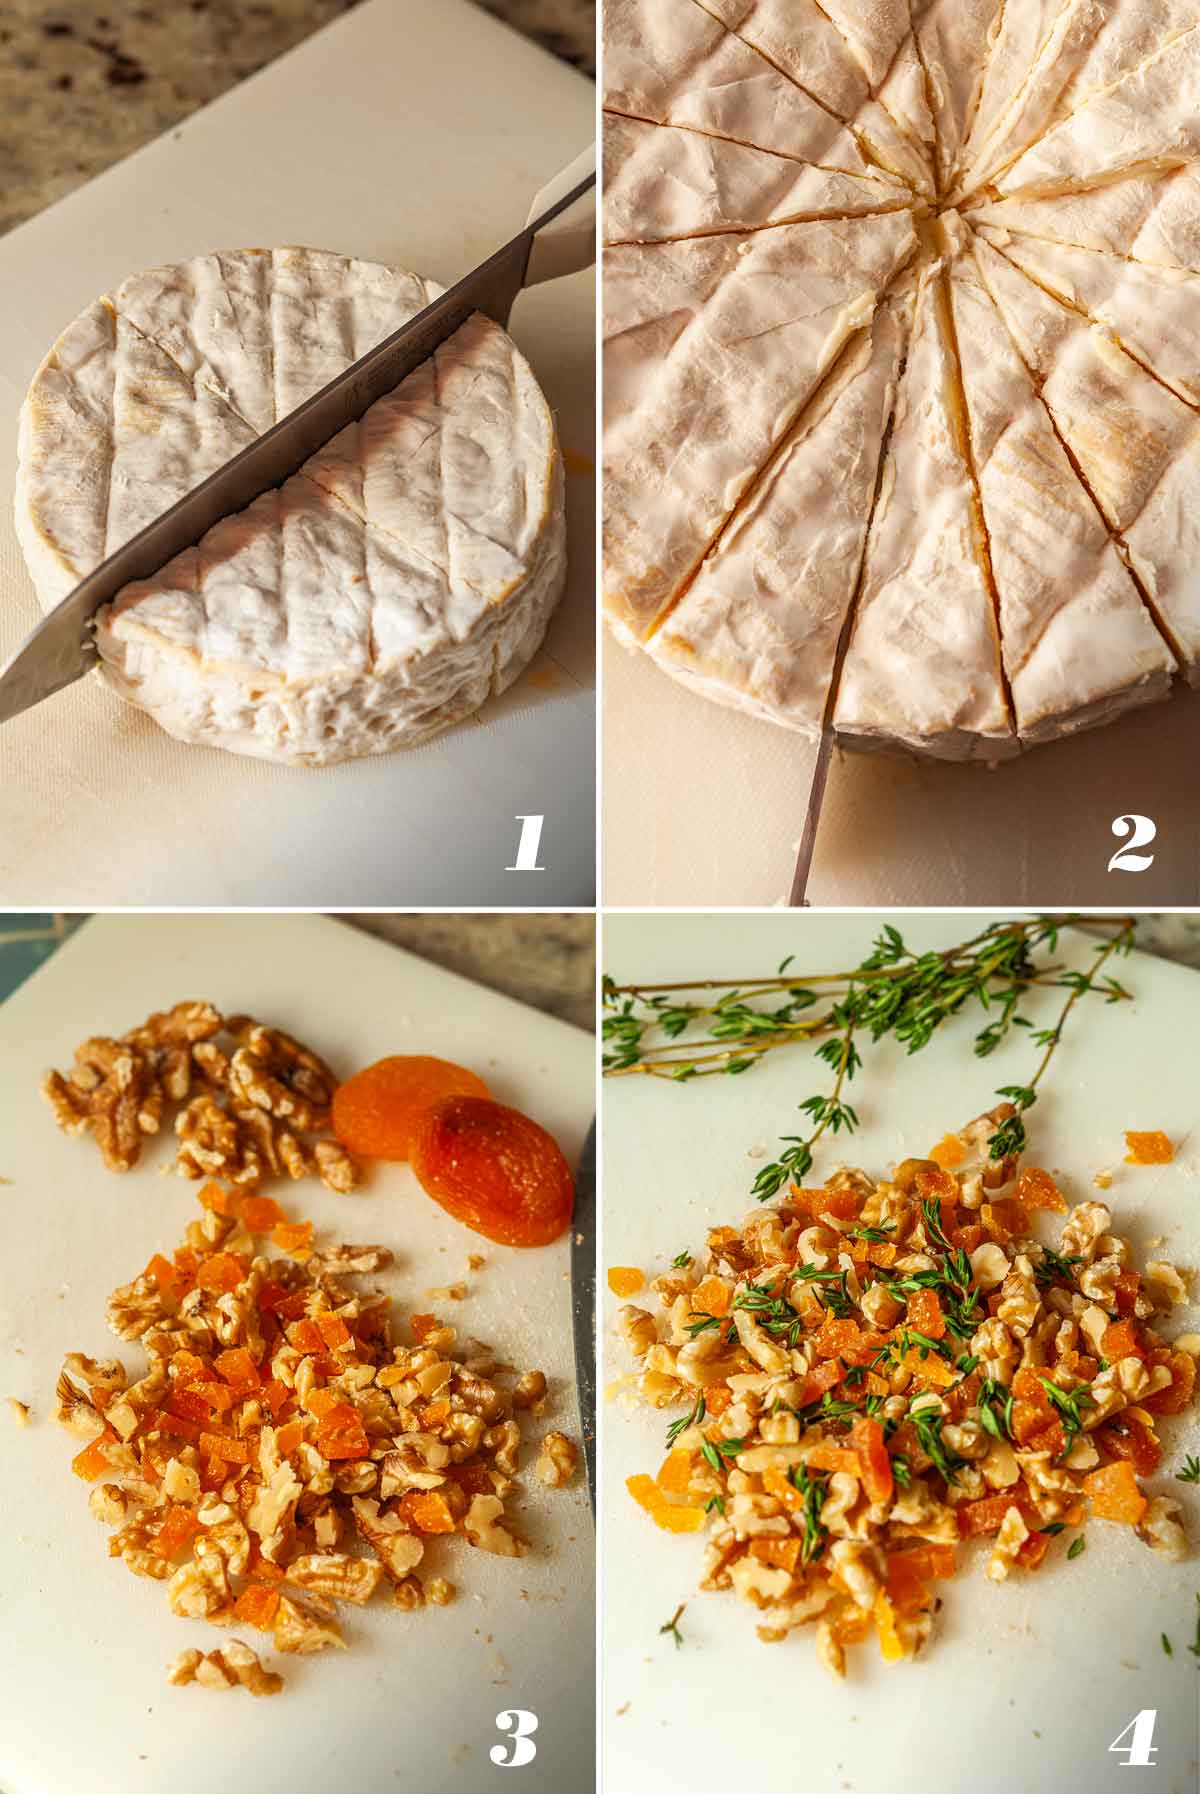 A collage of 4 numbered images showing how to slice cheese and make a nut and apricot topping.